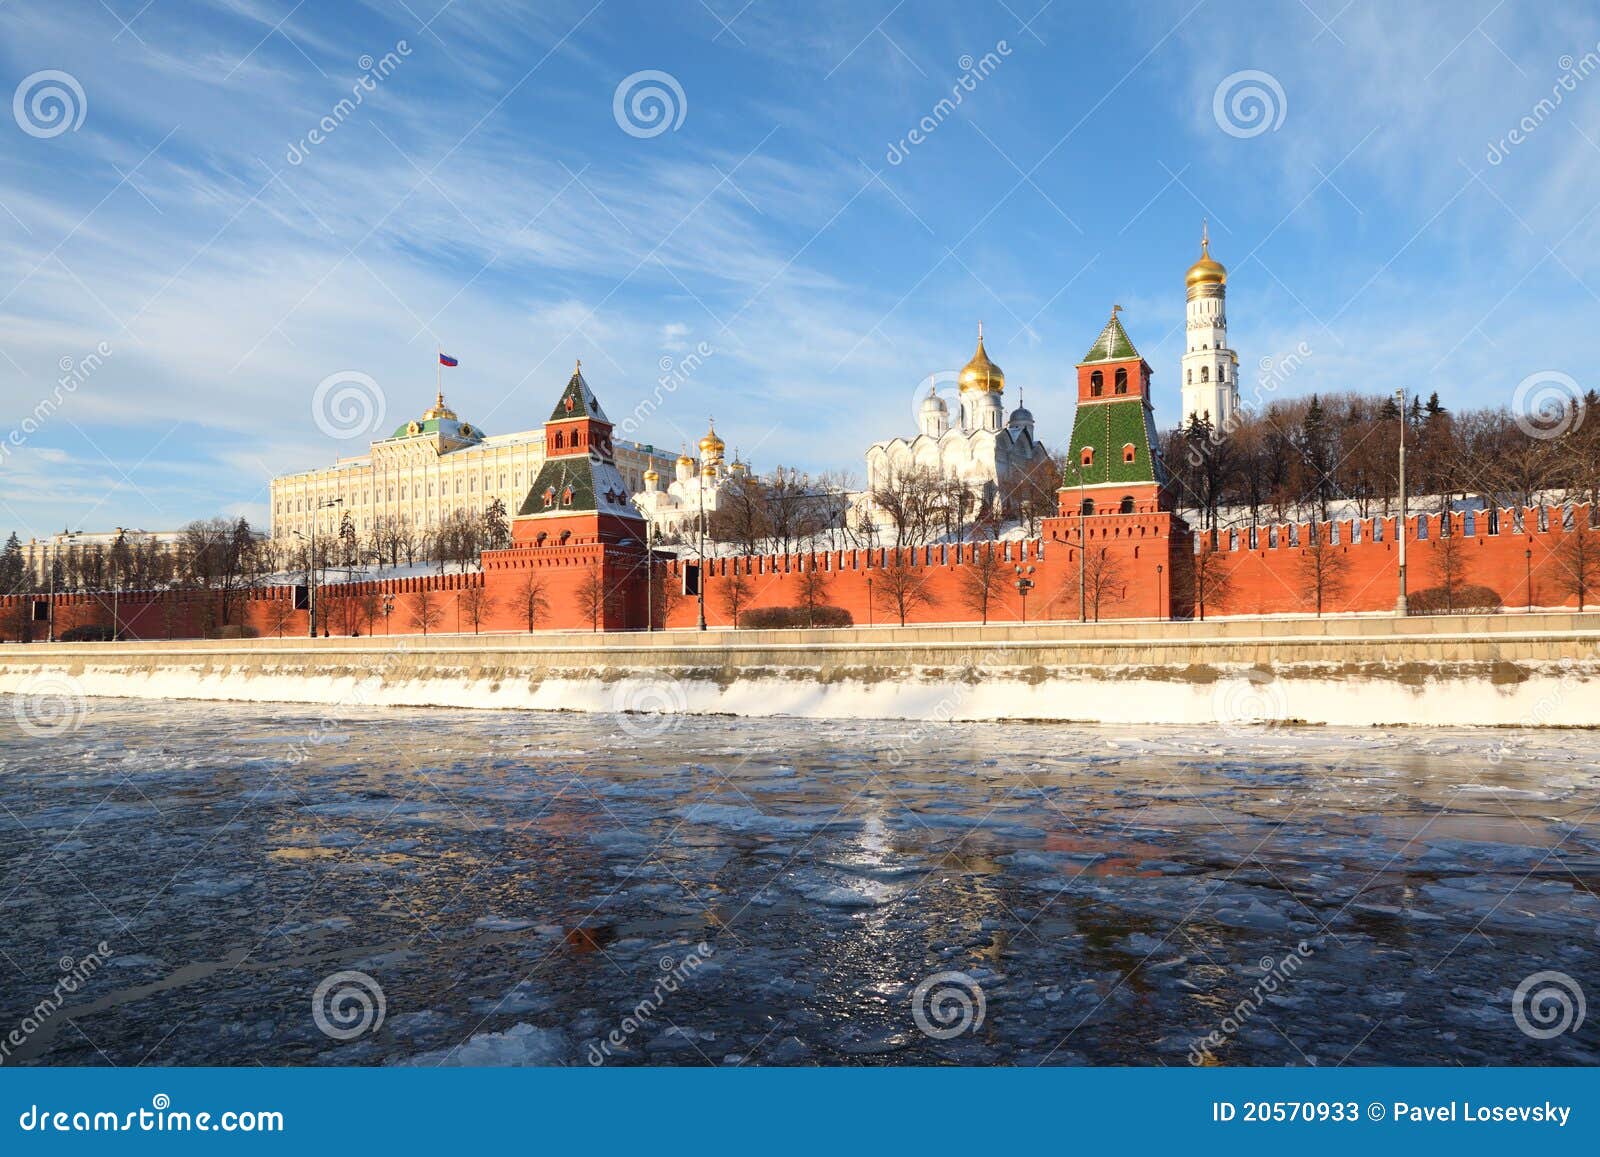 walls of famous kremlin and ivan great bell tower